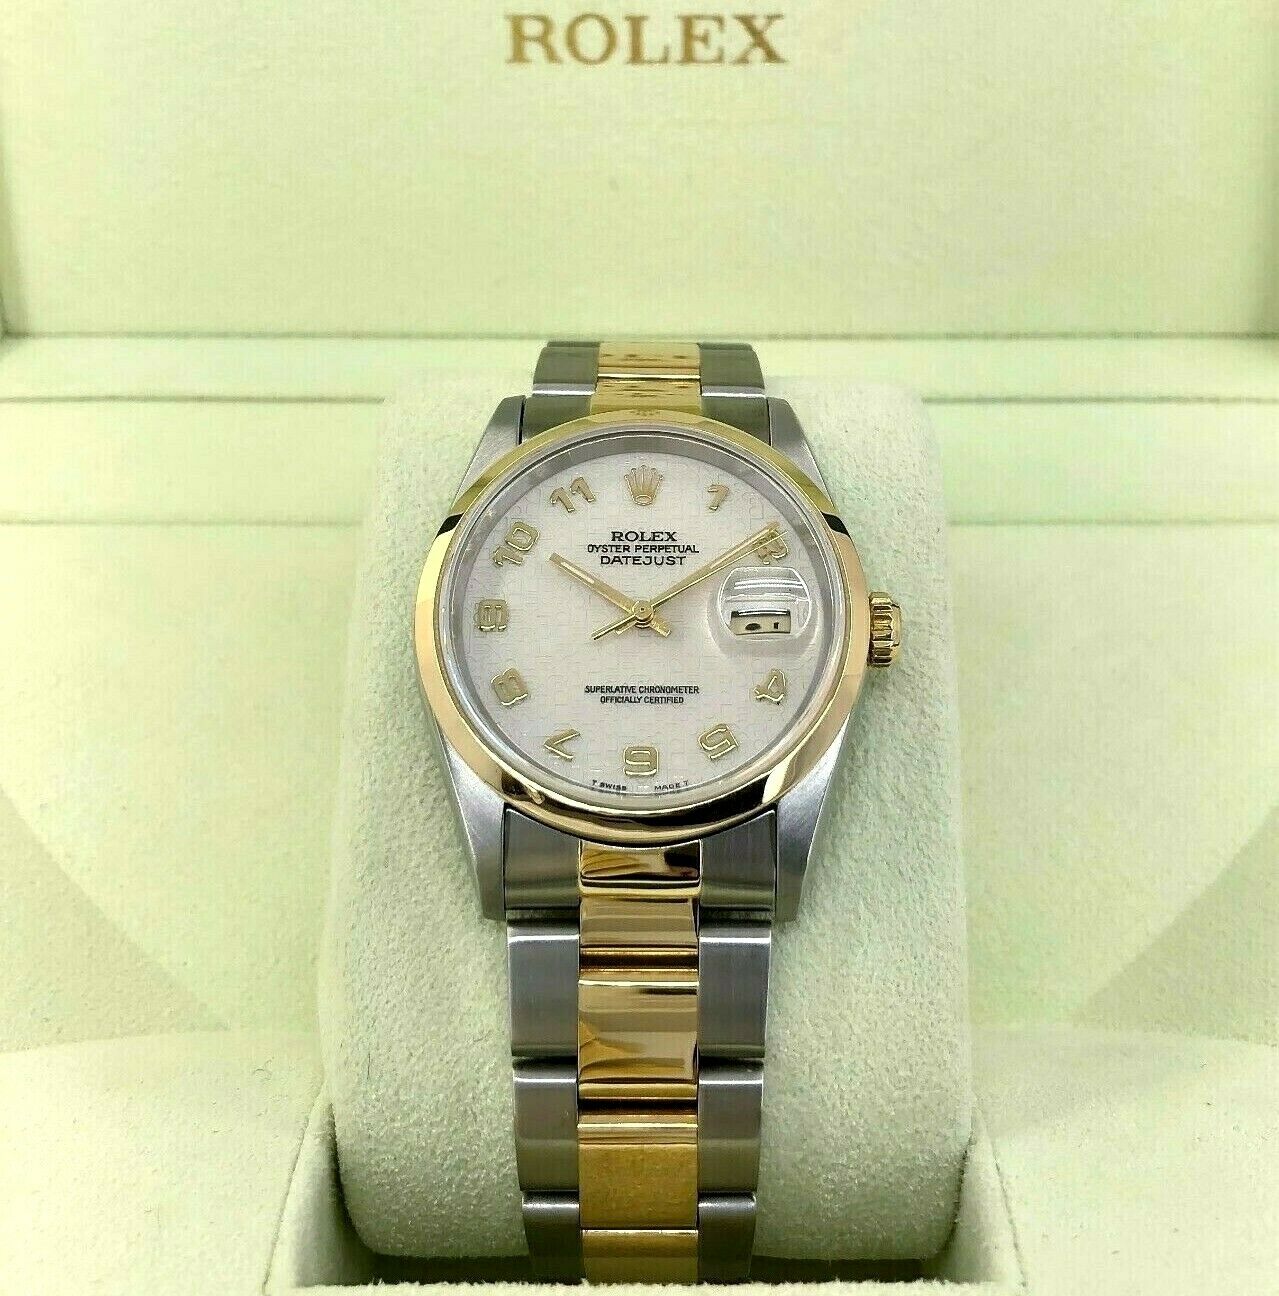 Rolex 36 MM Datejust Watch 18K Yellow Gold Stainless Steel Ref 16203 W Serial